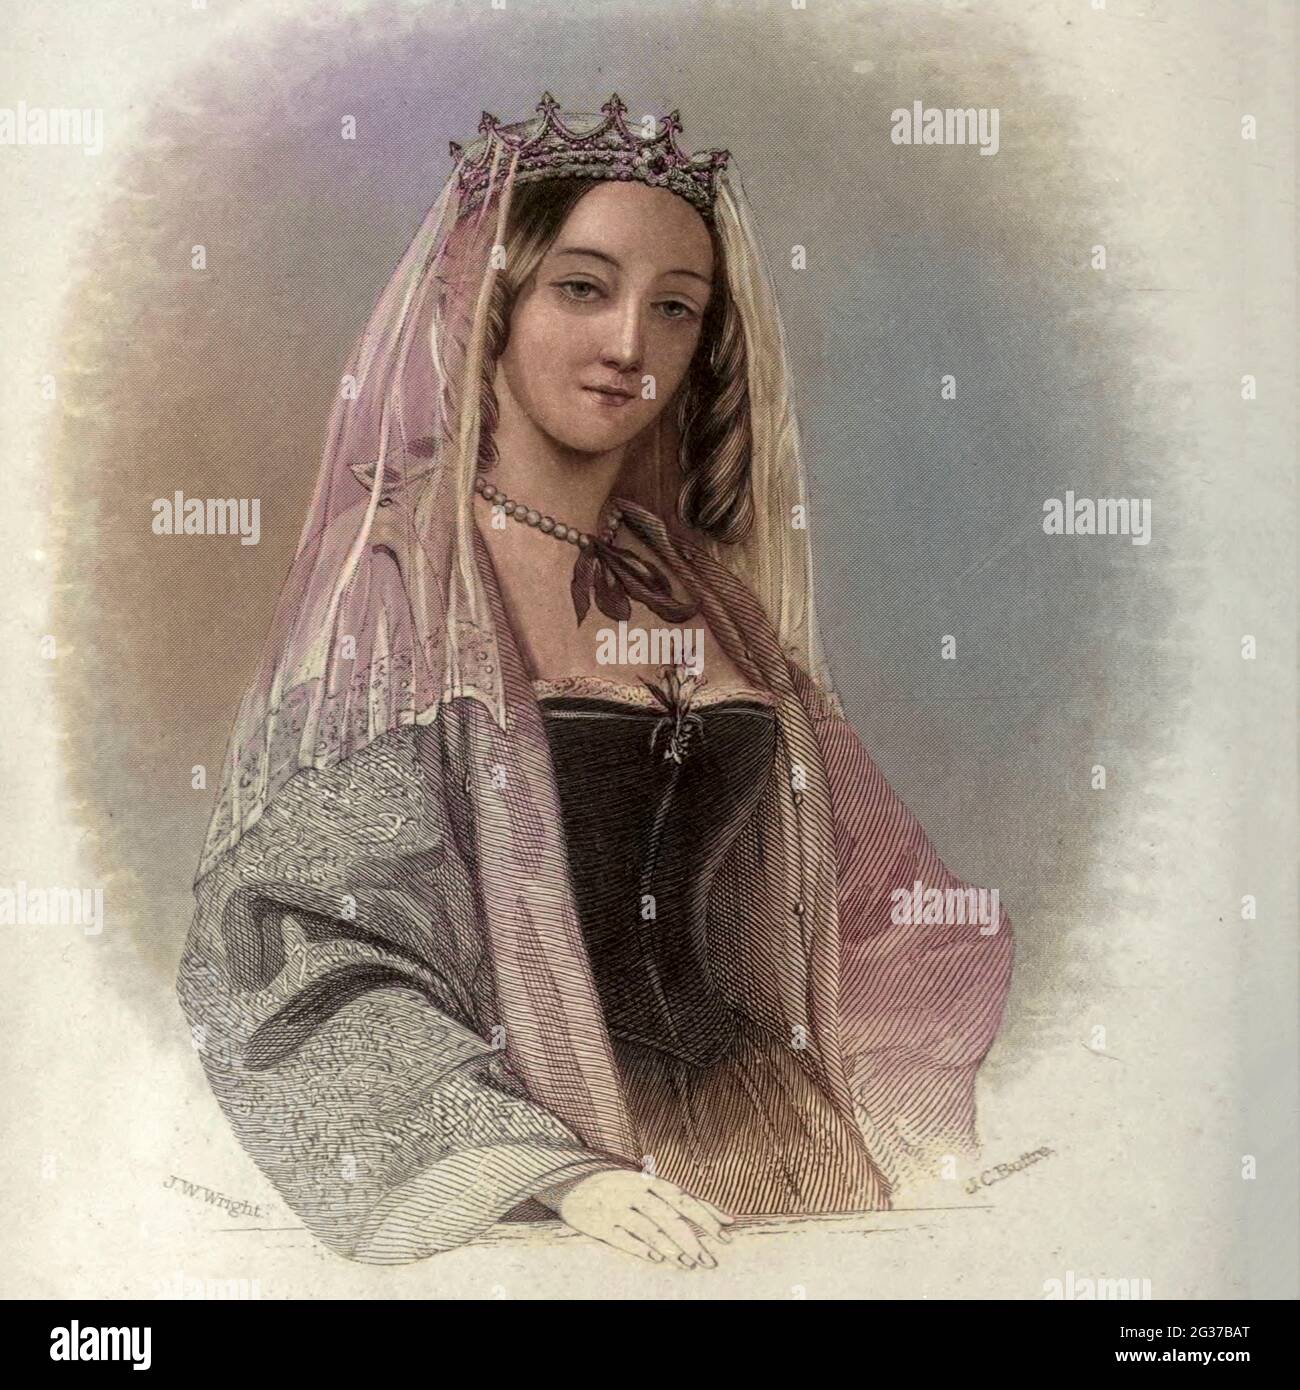 Machine colourised Berengaria of Navarre (c. 1165–1170 – 23 December 1230) was queen of England as the wife of Richard I (Richard Coeur de Lion, Lionheart) of England. She was the eldest daughter of Sancho VI of Navarre and Sancha of Castile. She did (unusually for the wife of a crusader) accompany her husband on the start of the Third Crusade, but mostly lived in his French possessions, where she gave generously to the church, despite difficulties in collecting the pension she was due from Richard's brother and successor John after she became a widow. From the book Heroines of the crusades by Stock Photo